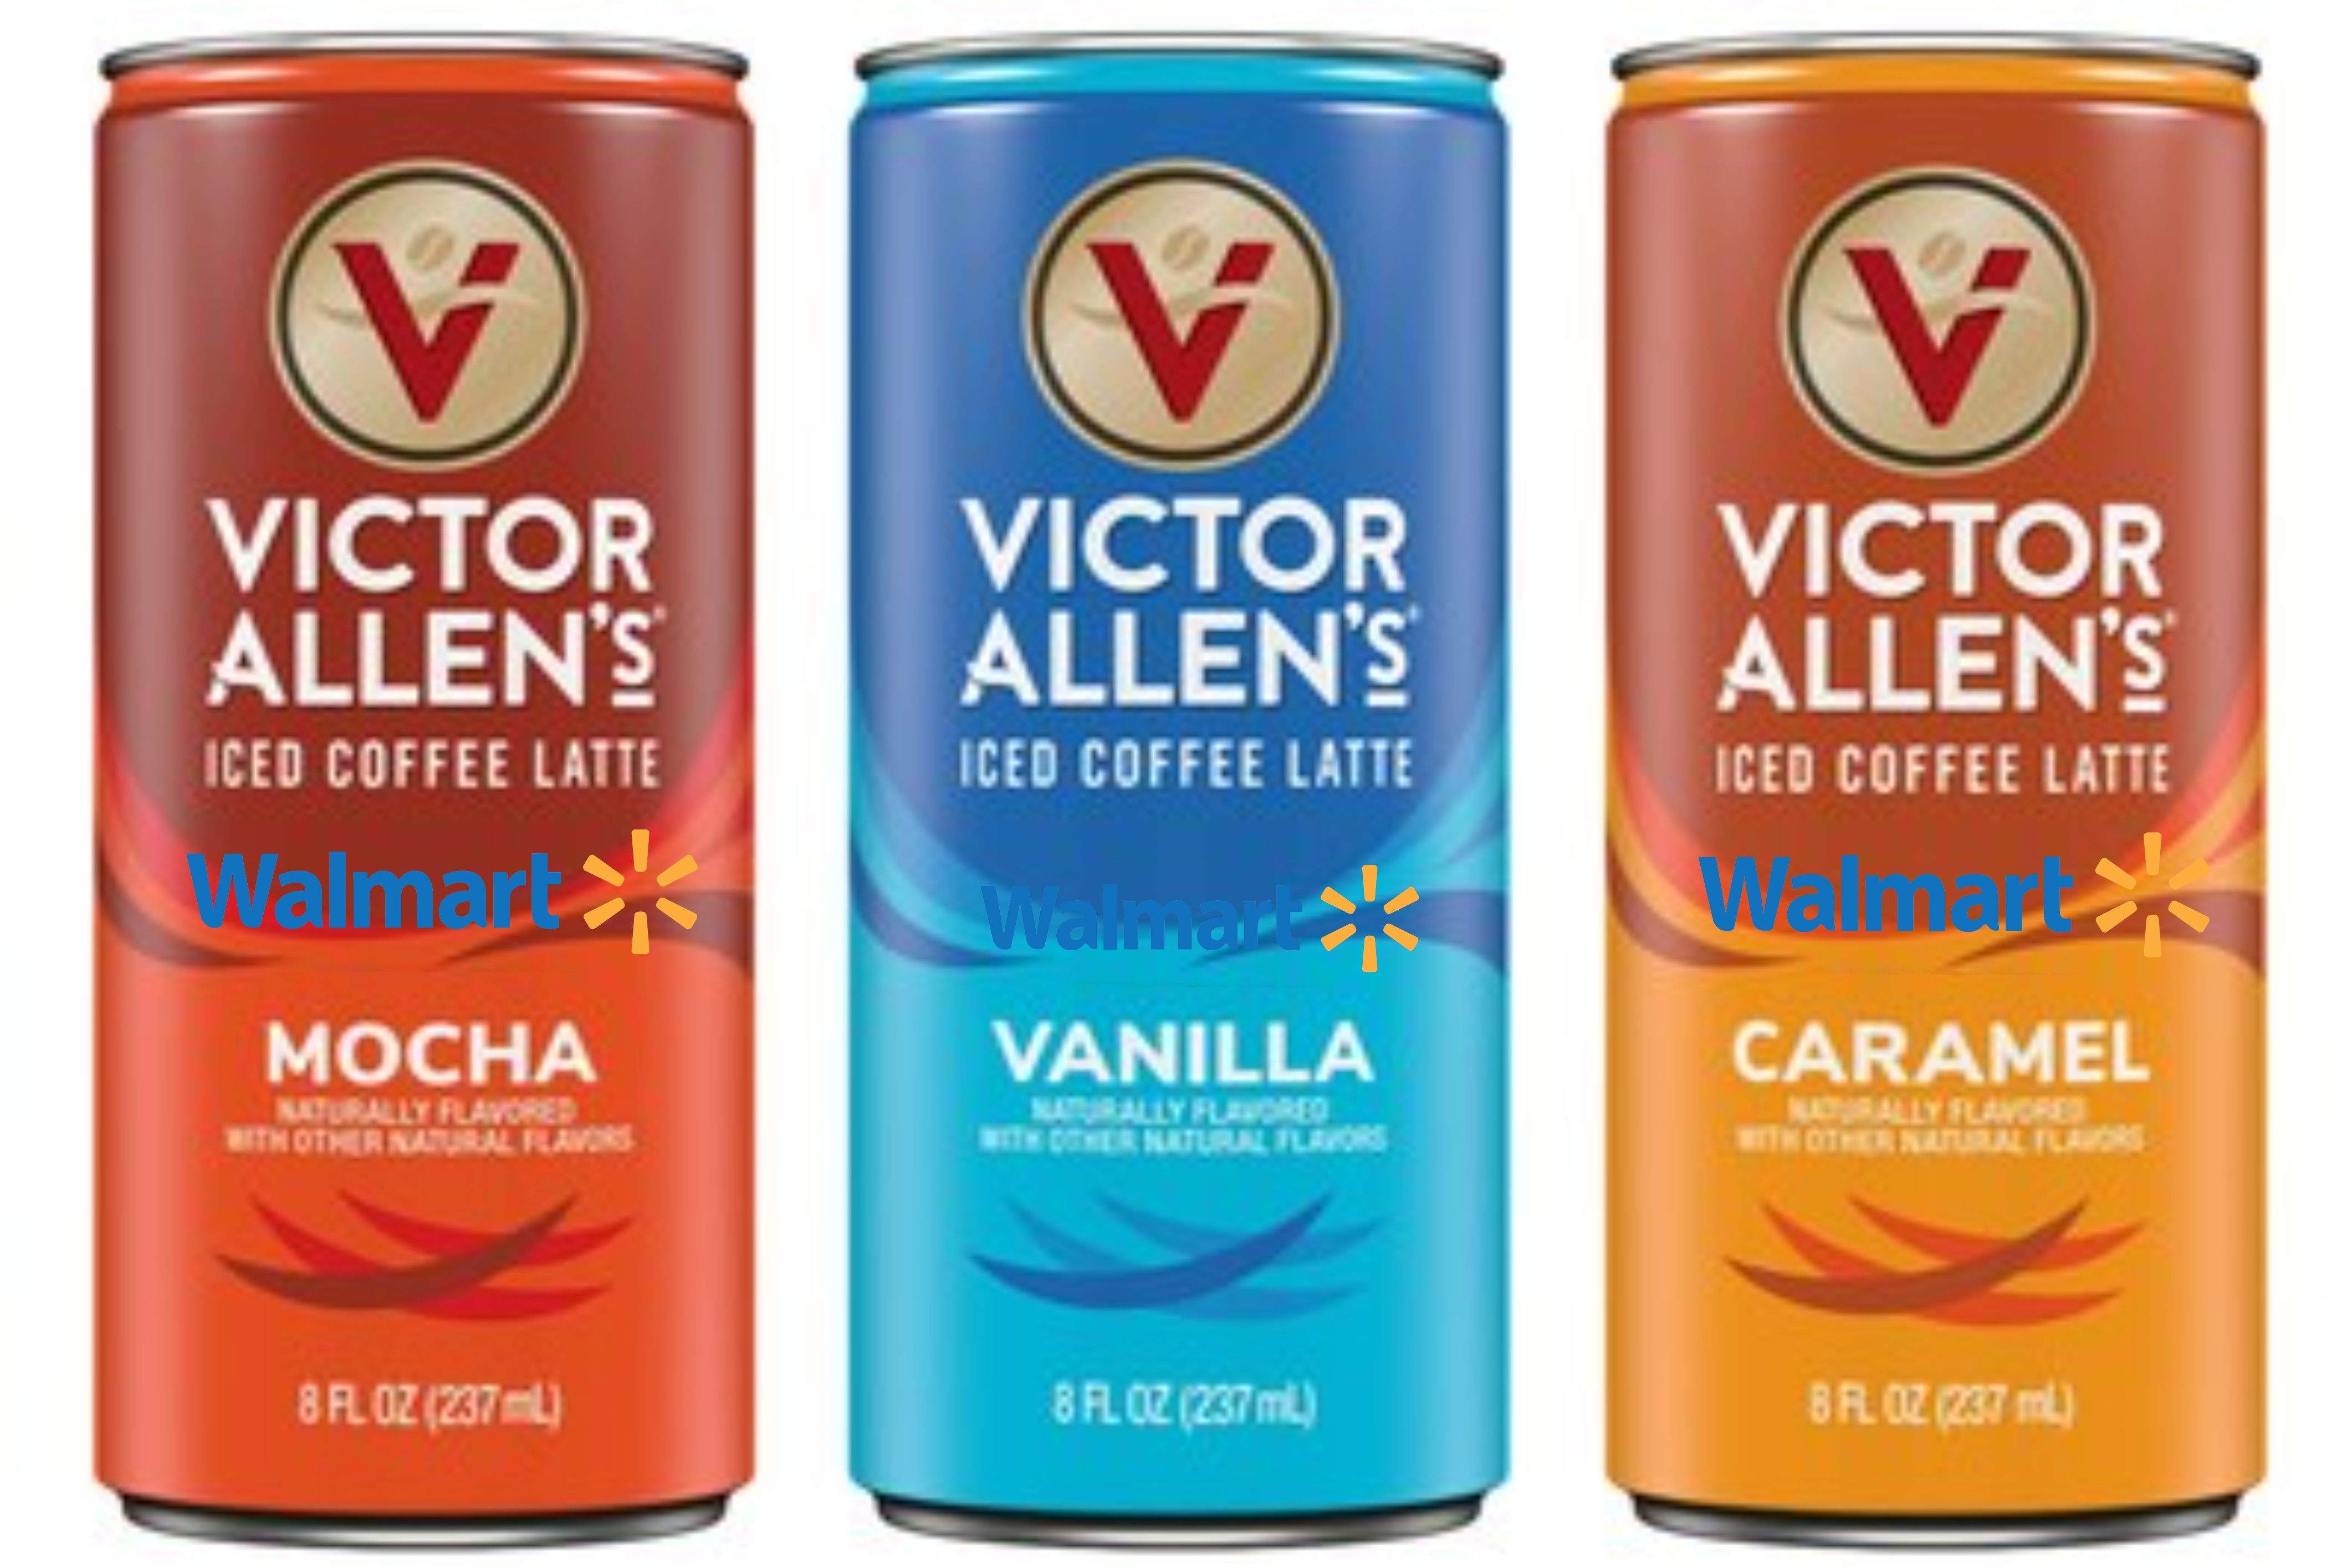 Walmart to retail Victor Allen’s Ready-To-Drink Iced Coffee Line in over 500 stores